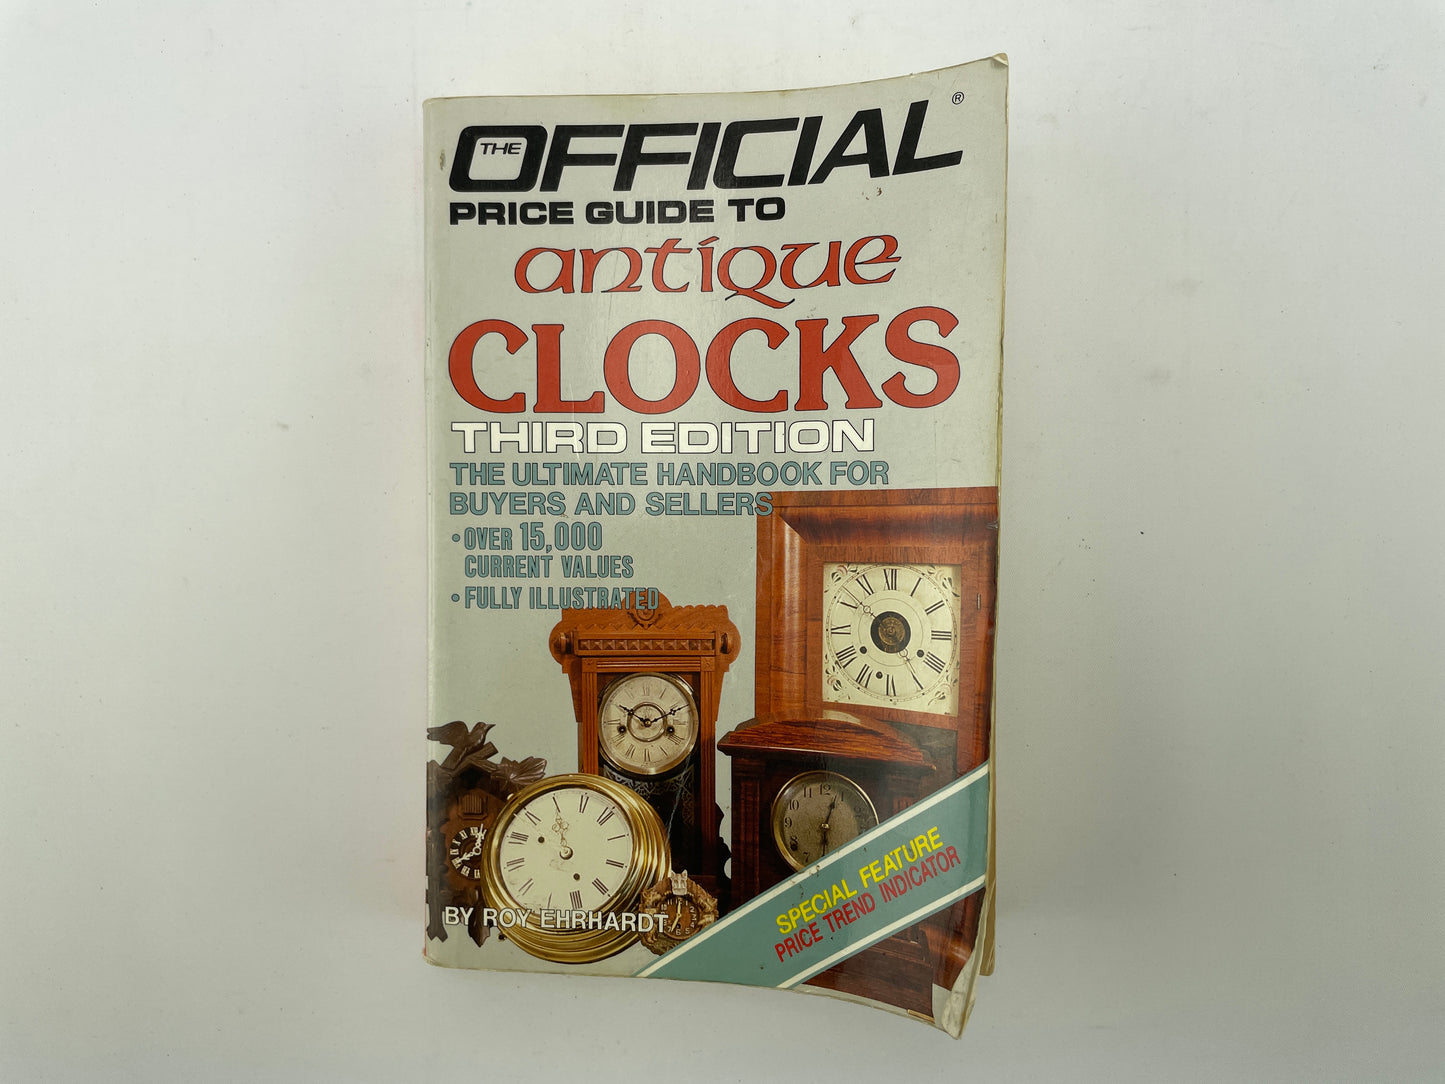 Lot 129- The Official Price Guide to Antique Clocks 3rd Edition by Roy Ehrhardt